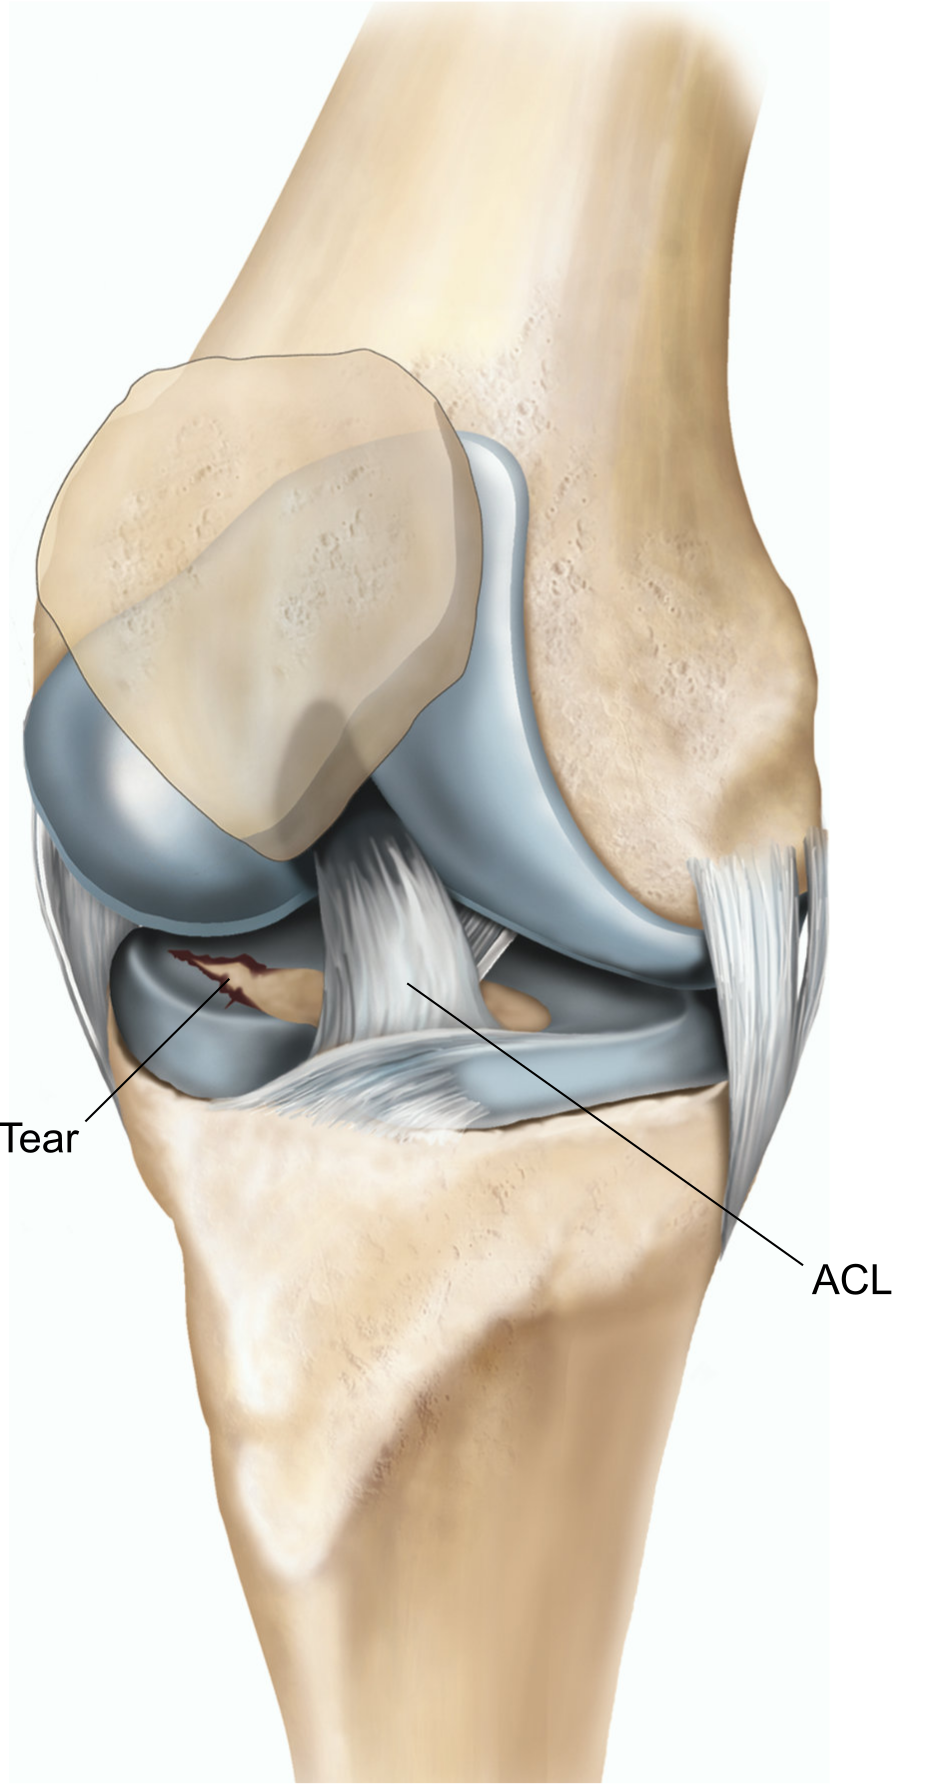 A right knee with a tear in the lateral meniscus